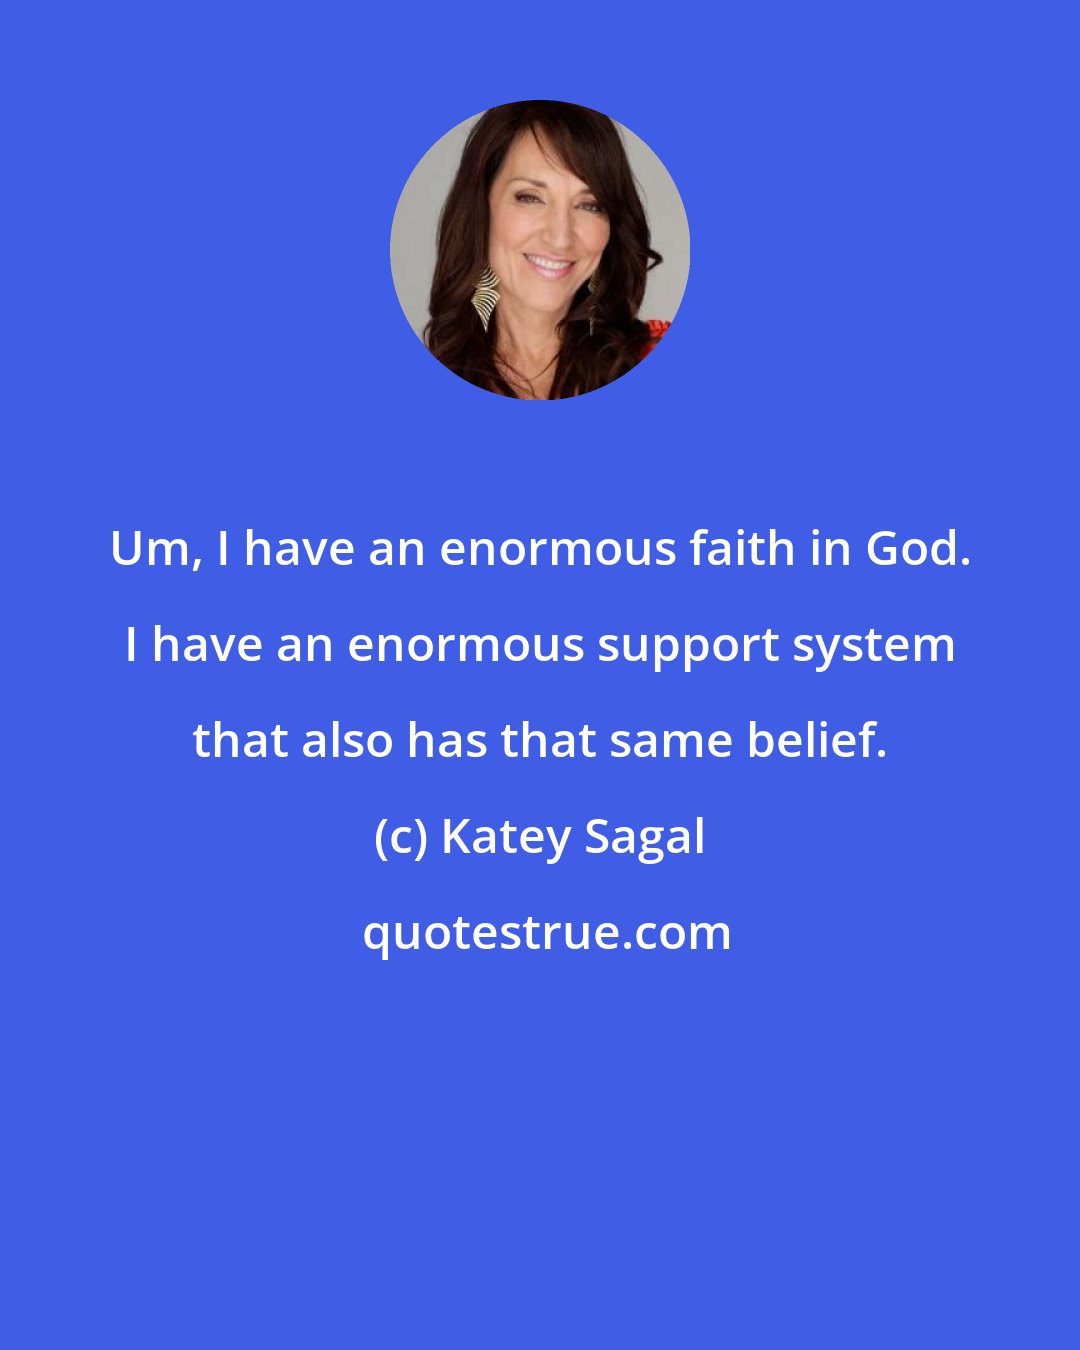 Katey Sagal: Um, I have an enormous faith in God. I have an enormous support system that also has that same belief.